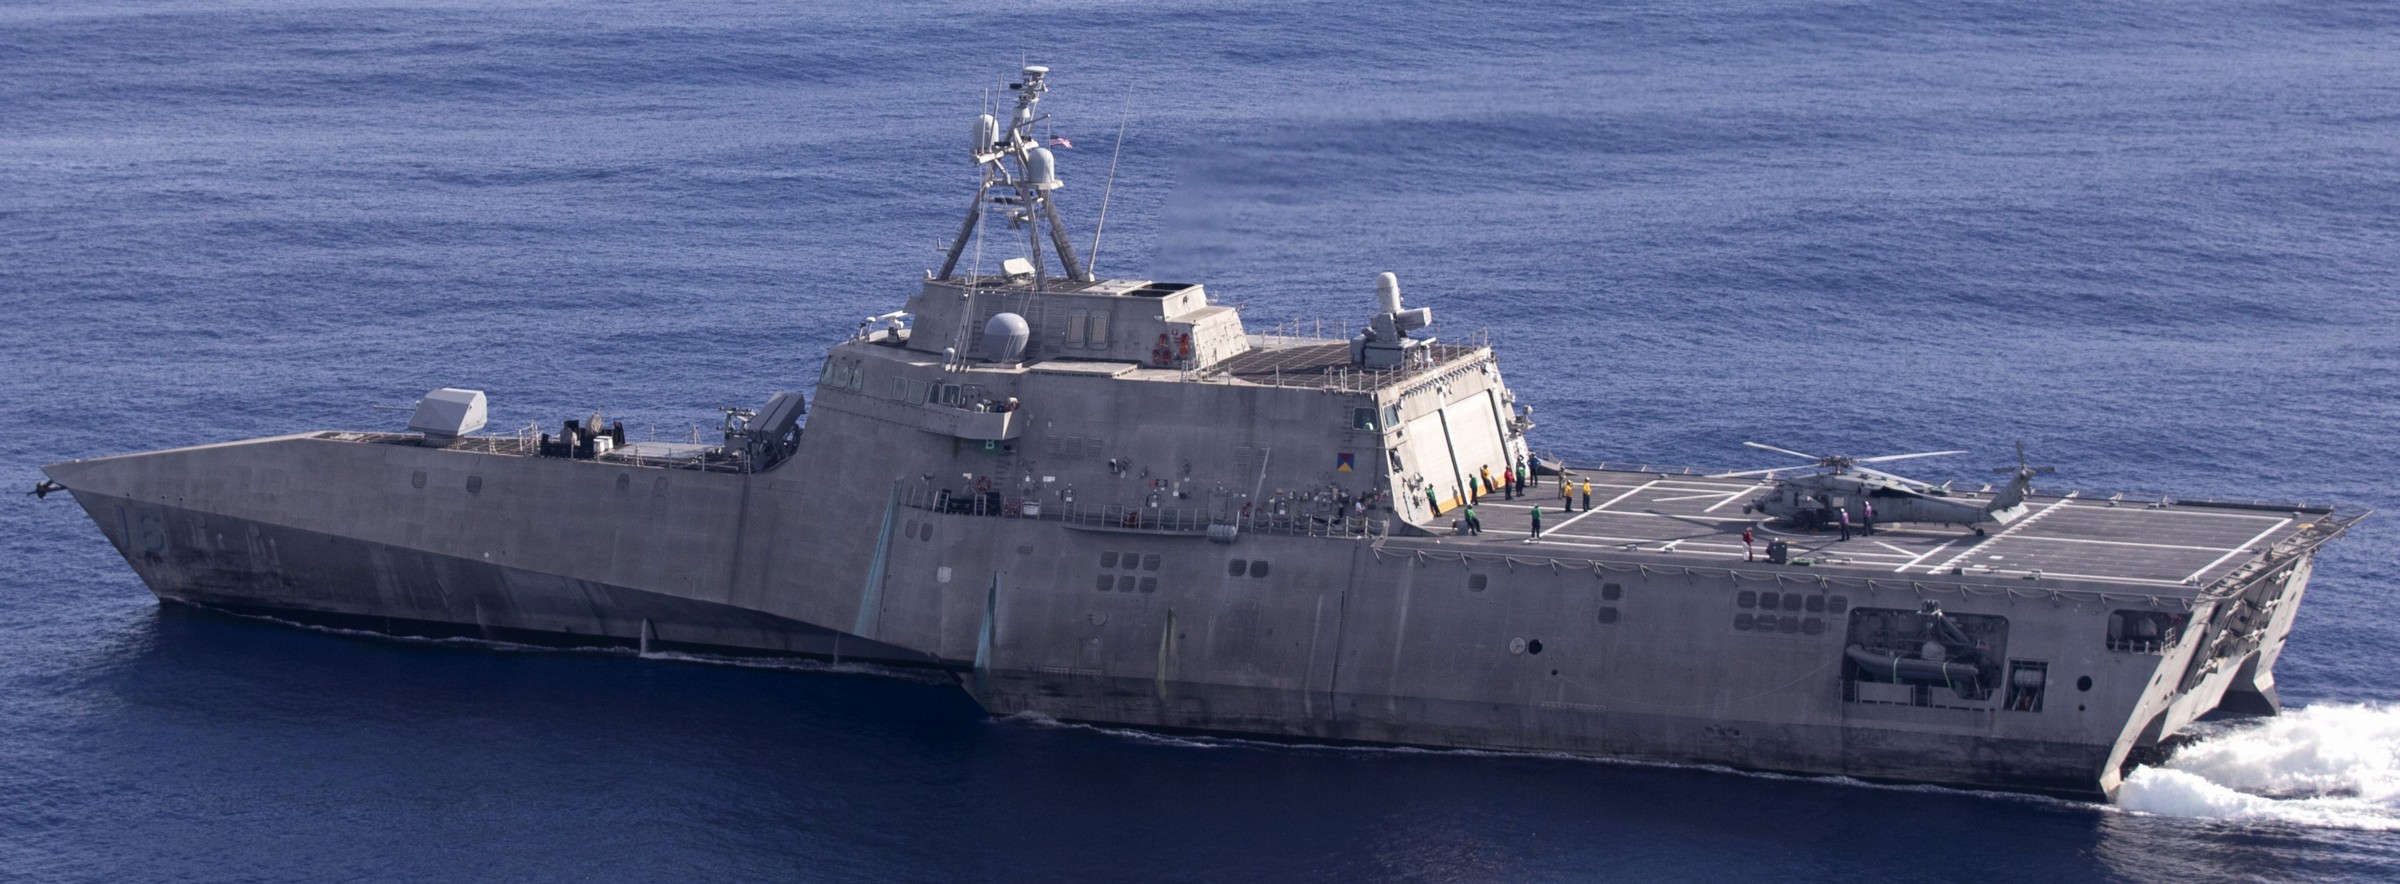 lcs-16 uss tulsa independence class littoral combat ship us navy helicopter operations 46